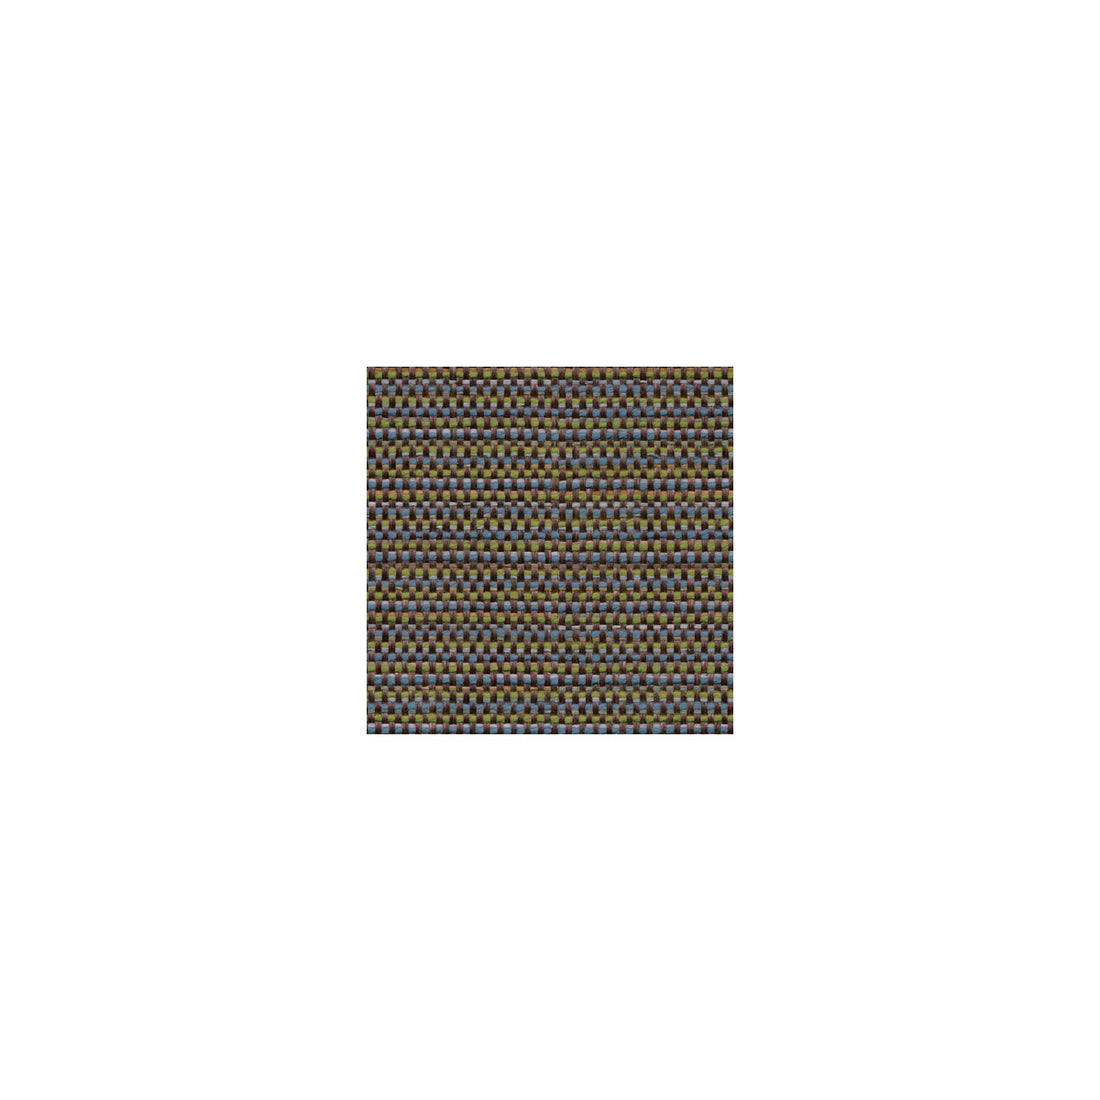 Kravet Contract fabric in 30163-650 color - pattern 30163.650.0 - by Kravet Contract